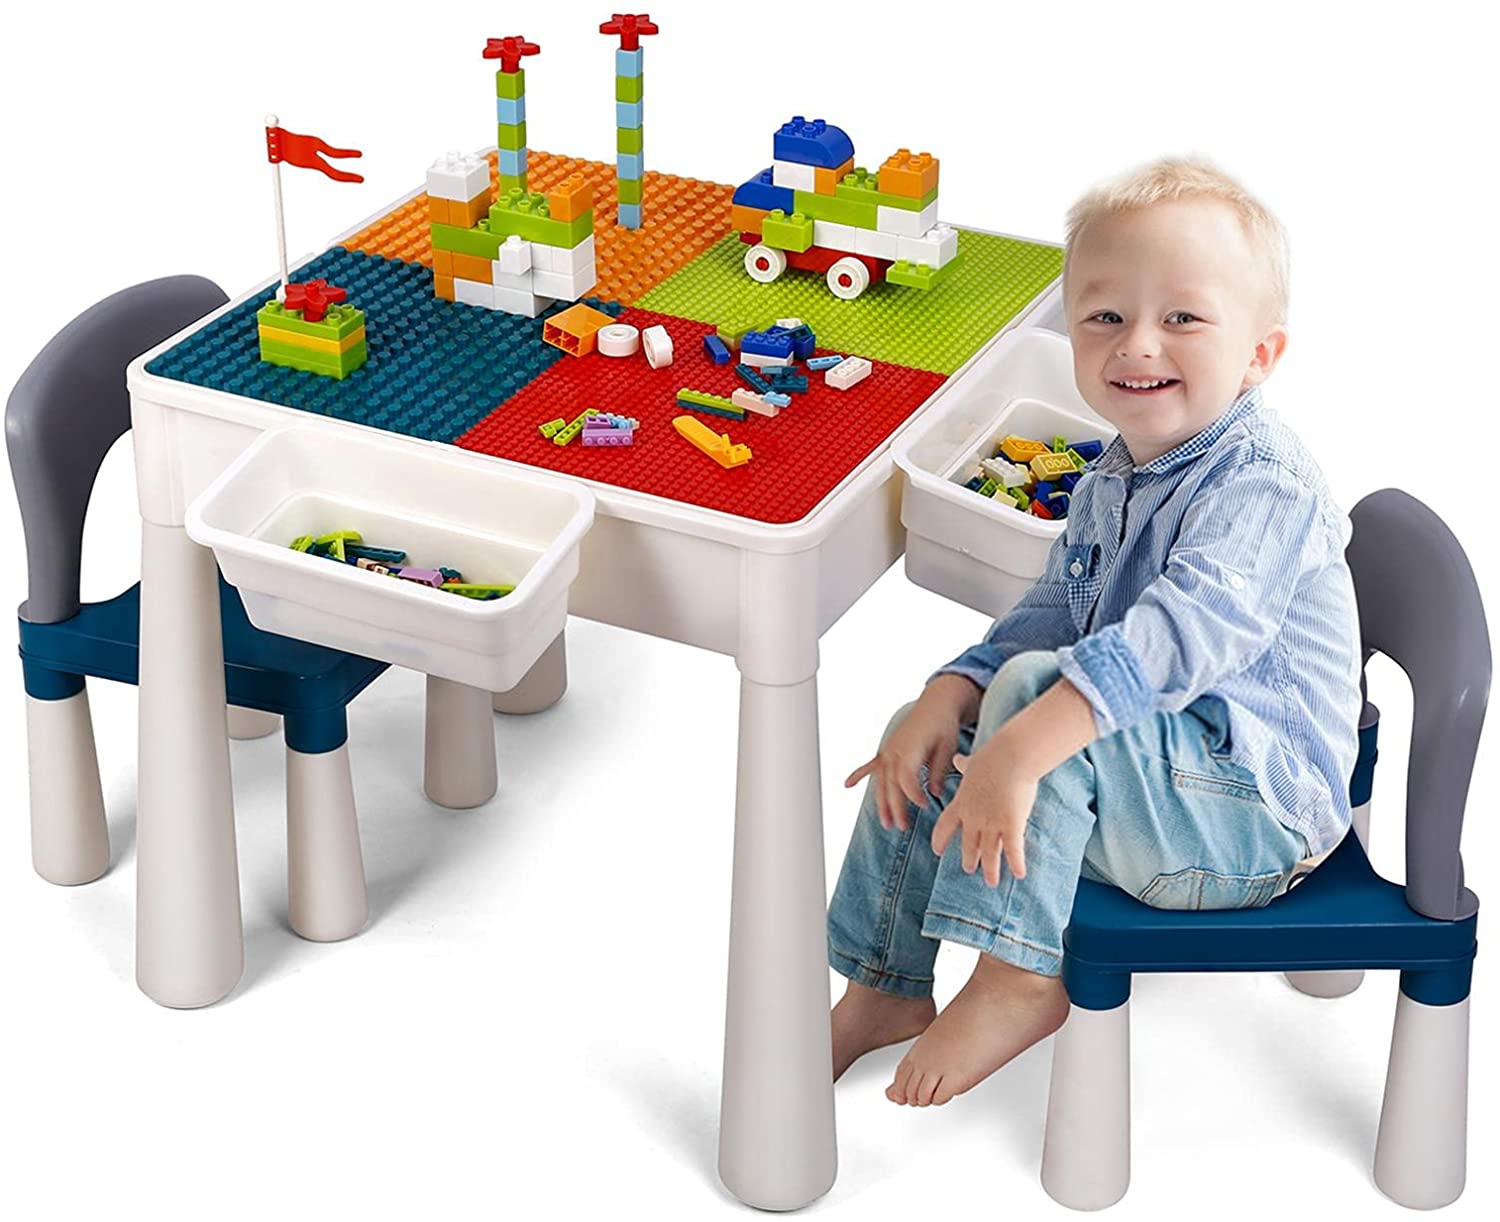 2-in-1 Kids Activity Table and 2 Chairs Set with Storage Building